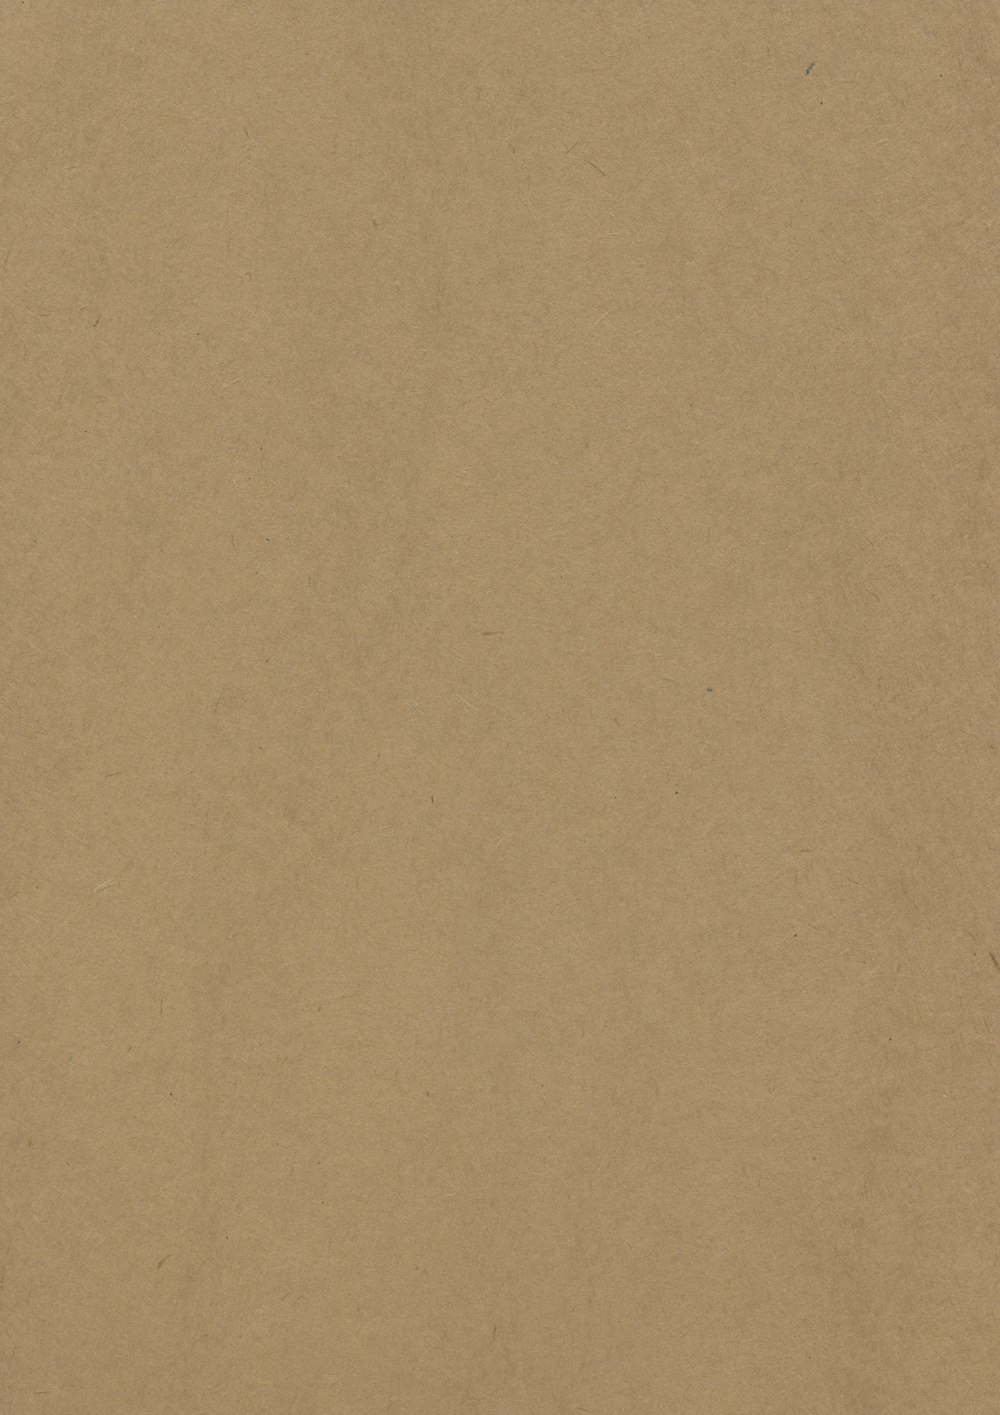 Vintage Craft Paper Texture Dark Grey Black Color. Background Of Kraft  Package Paper. Stock Photo, Picture and Royalty Free Image. Image 26598996.